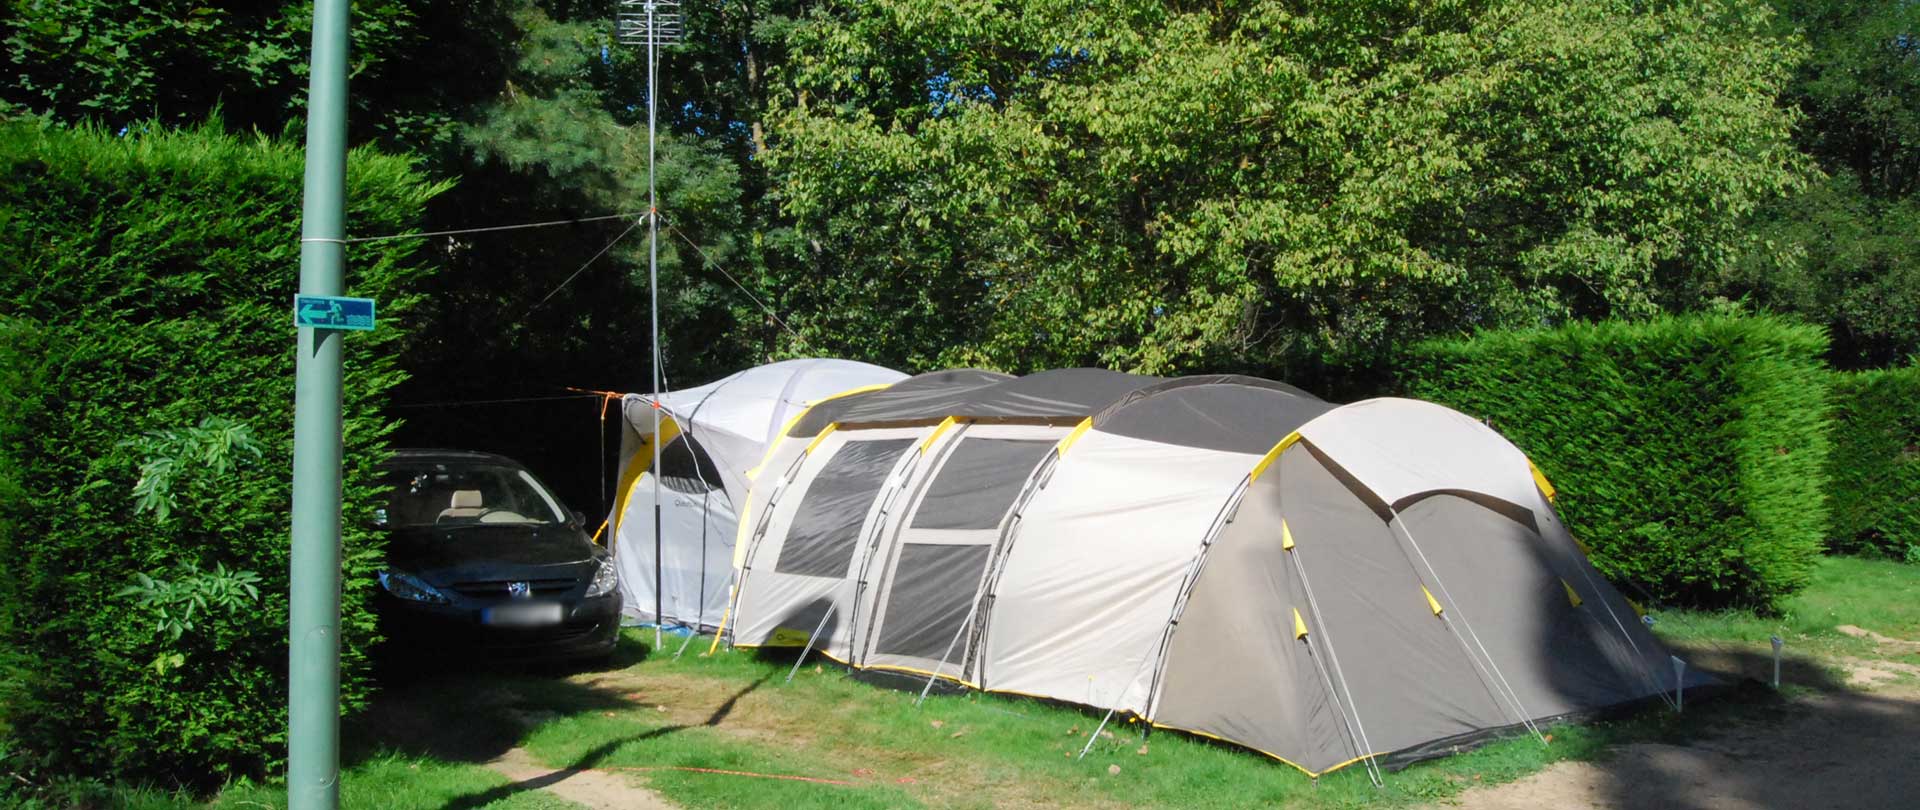 emplacement camping thiers puy de dome